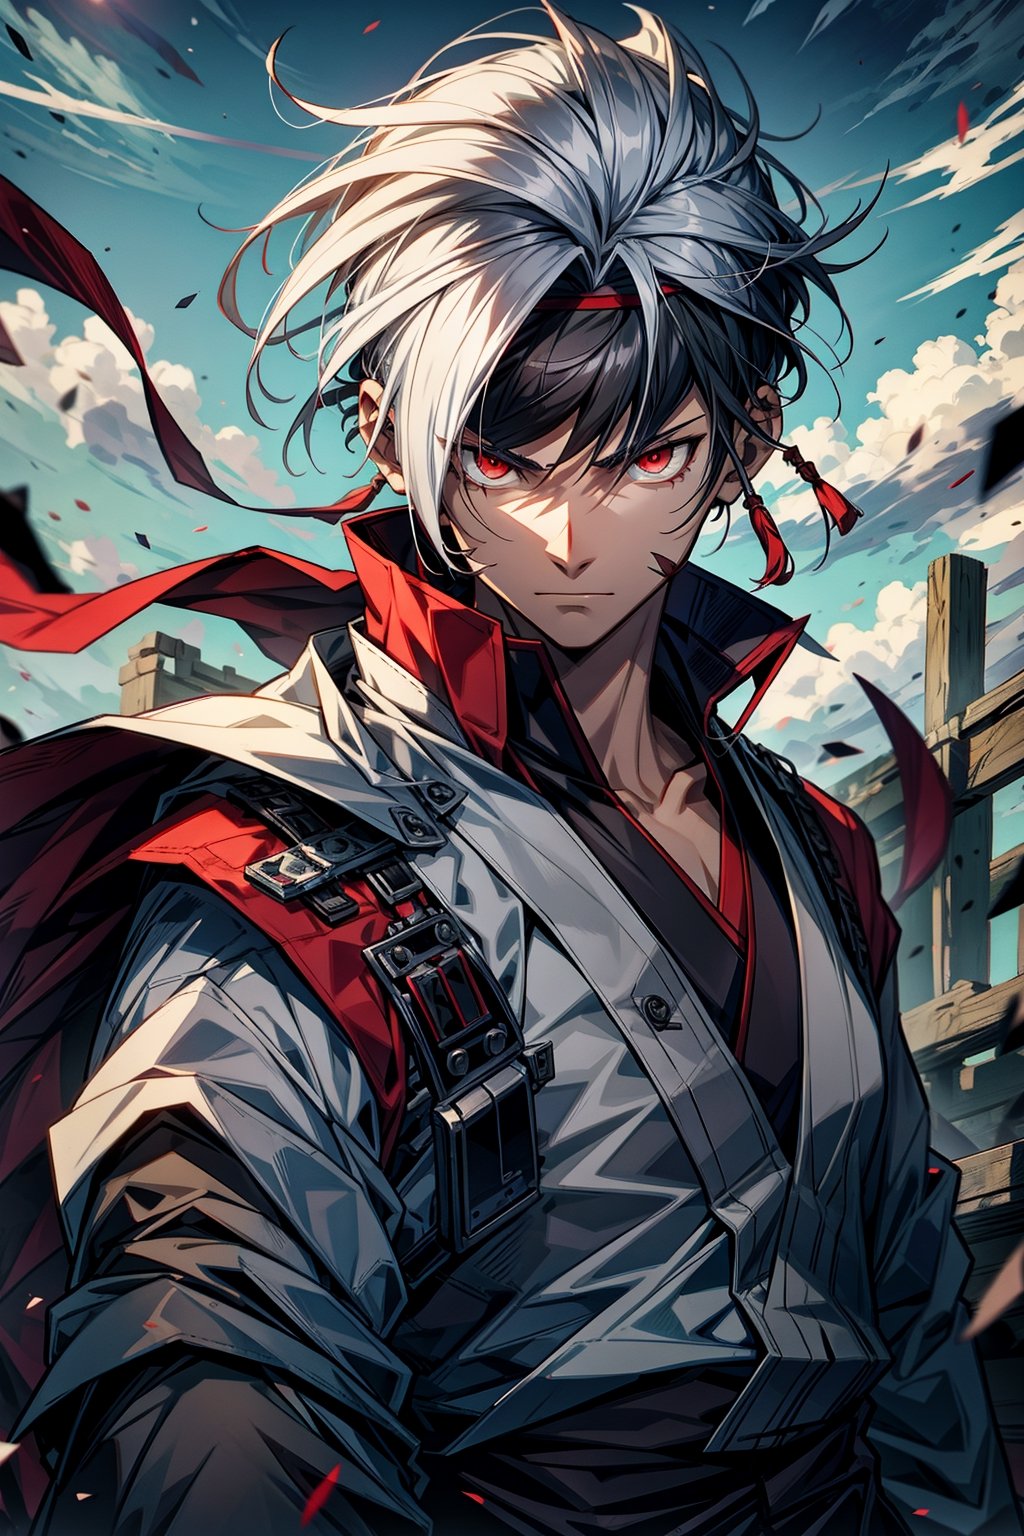 The Last Airbender anime style, Male, 20 years old, mature, adult, cool male character, slender, short white hair, wild cool bowl-cut, metal headband with short metal oni horns on it, red evil eyes, neck and mouth covered by messy white bandages, cool elegant violent and black traditional japanese clothes with long sleeve on the right and sleeveless on the left, white bandages around left arm, neutral background